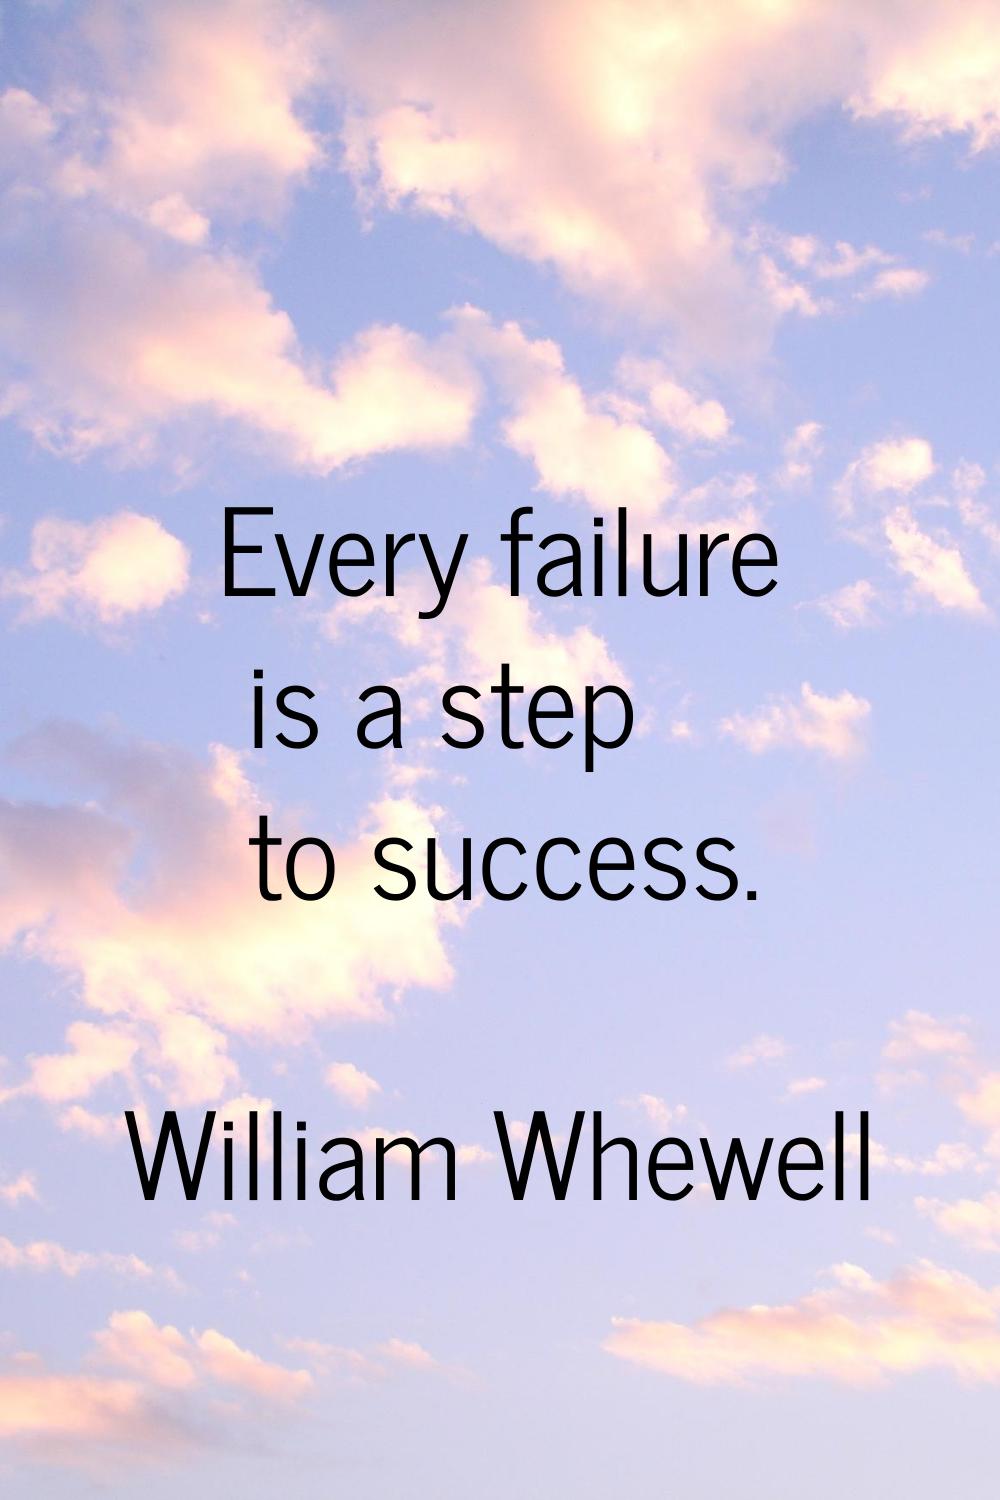 Every failure is a step to success.